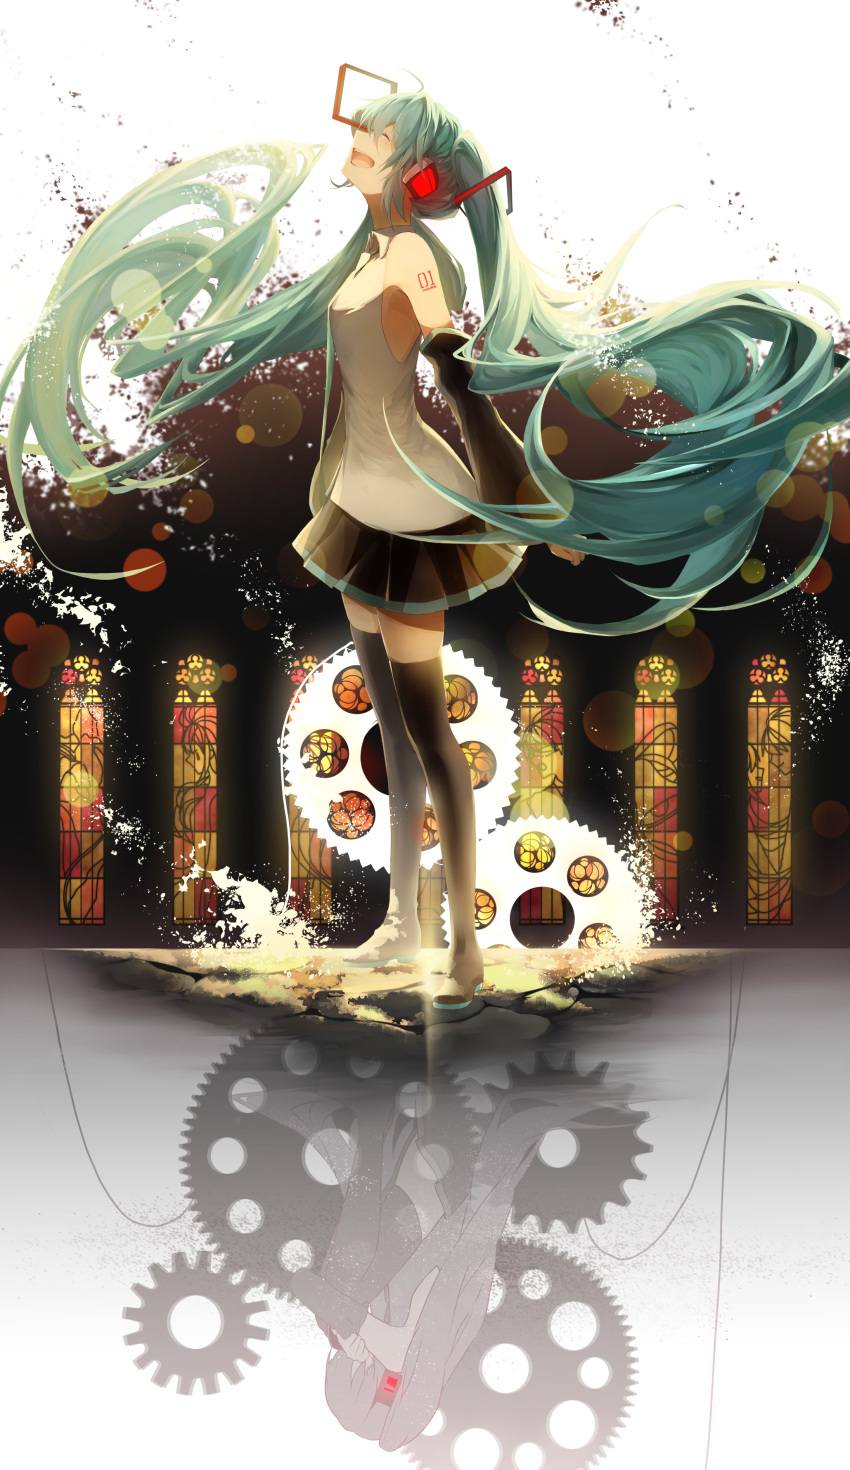 1girl :d absurdres blush boots closed_eyes crossed_arms detached_sleeves different_reflection dual_persona floating_hair from_side gears green_hair hatsune_miku head_down highres lens_flare long_hair looking_up necktie number open_mouth pleated_skirt profile reflection saihate_(artist) shirt sitting skirt sleeveless sleeveless_shirt smile stained_glass standing tears thigh-highs thigh_boots twintails very_long_hair vocaloid